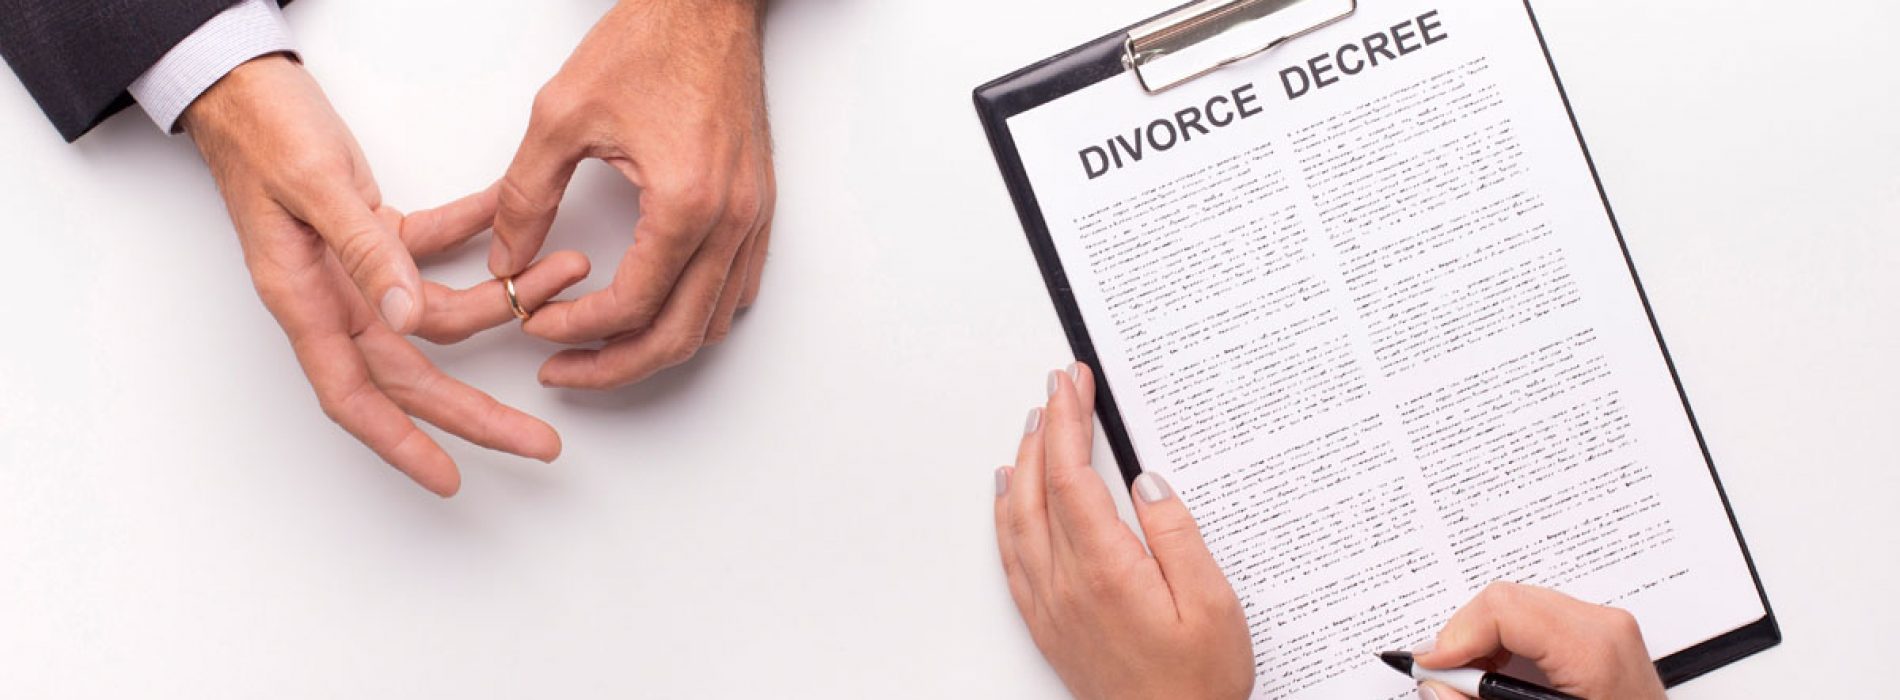 Three Things a Divorce Lawyer will Often Advise Couples During the Divorce Process